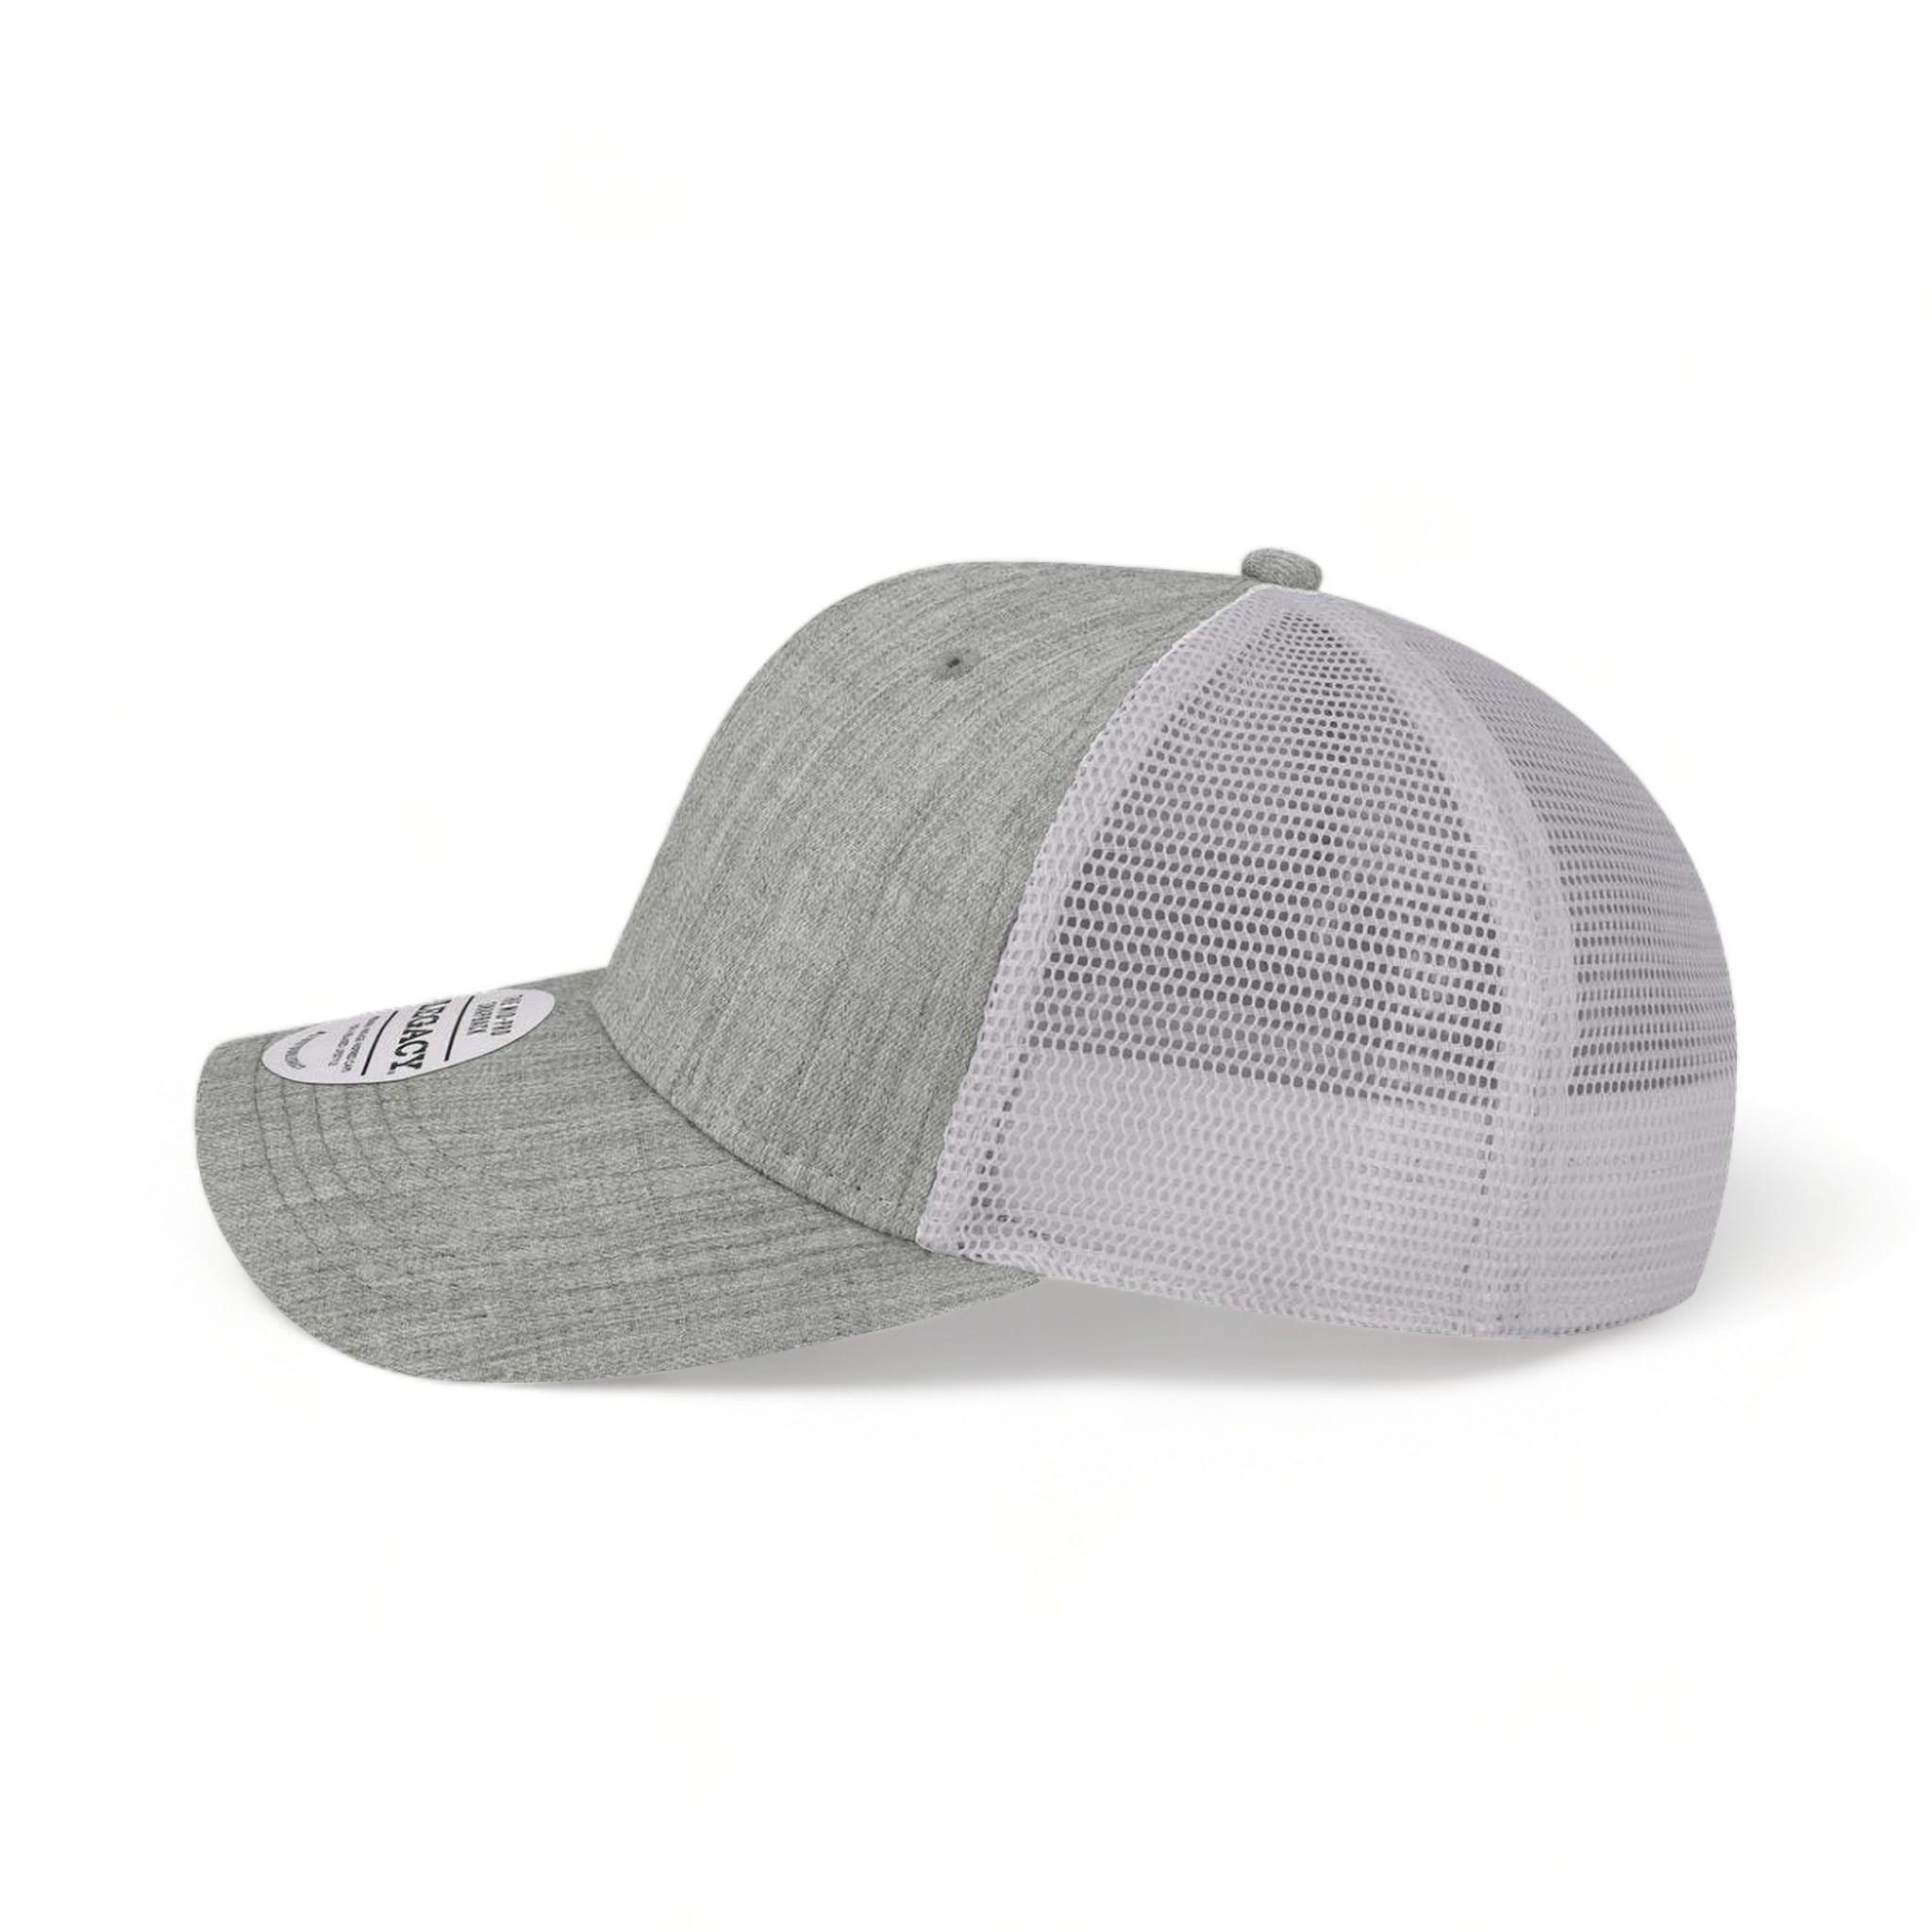 Side view of LEGACY MPS custom hat in mélange grey and white